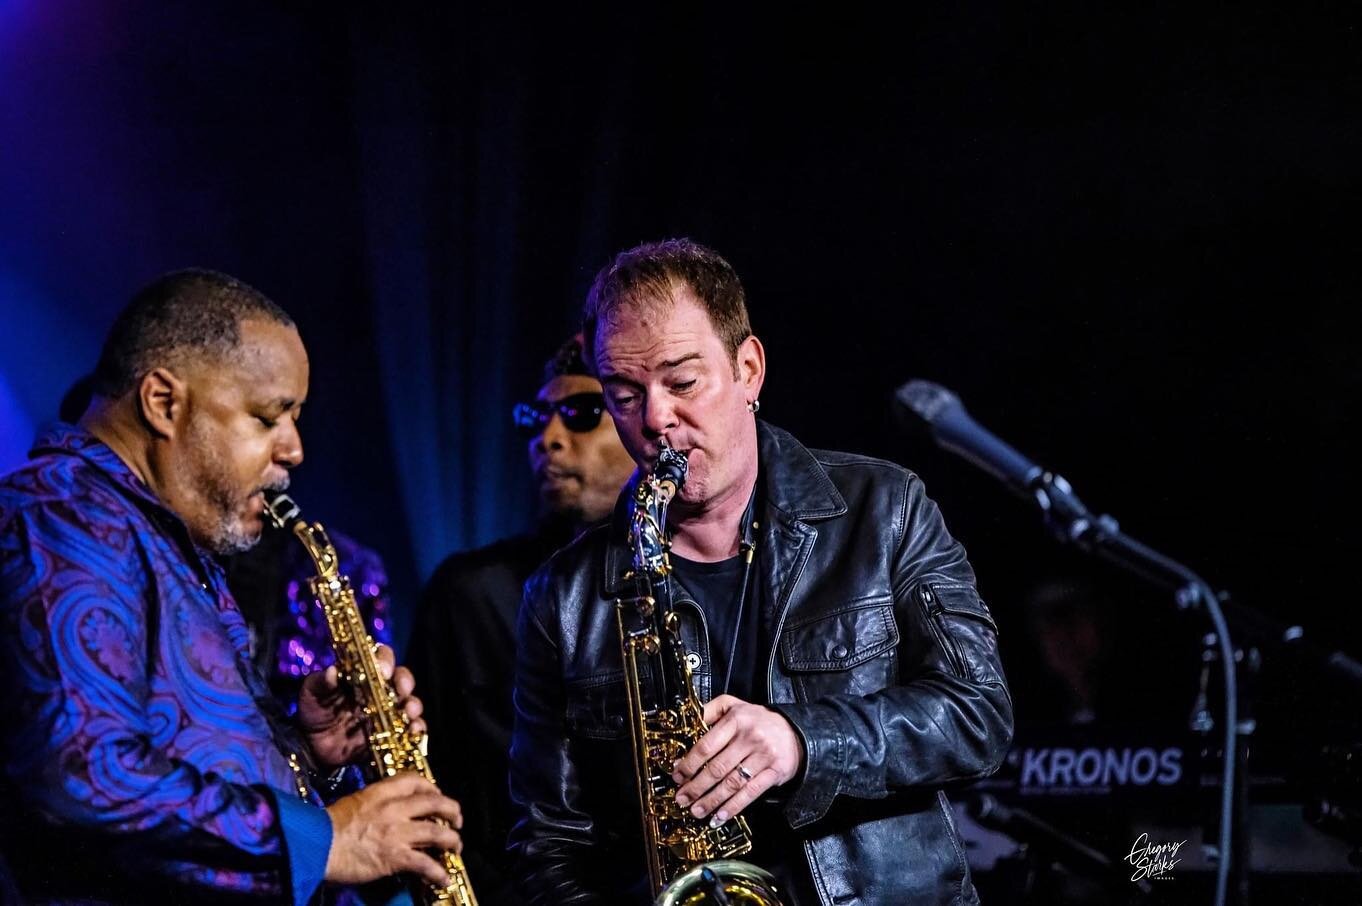 Had a beautiful time this weekend with my dear friend @najeeofficial getting a chance to hang out and also to join him and his amazing band on stage for a tune along with another talented friend, @texumjr - Najee is not only a living legend as a musi